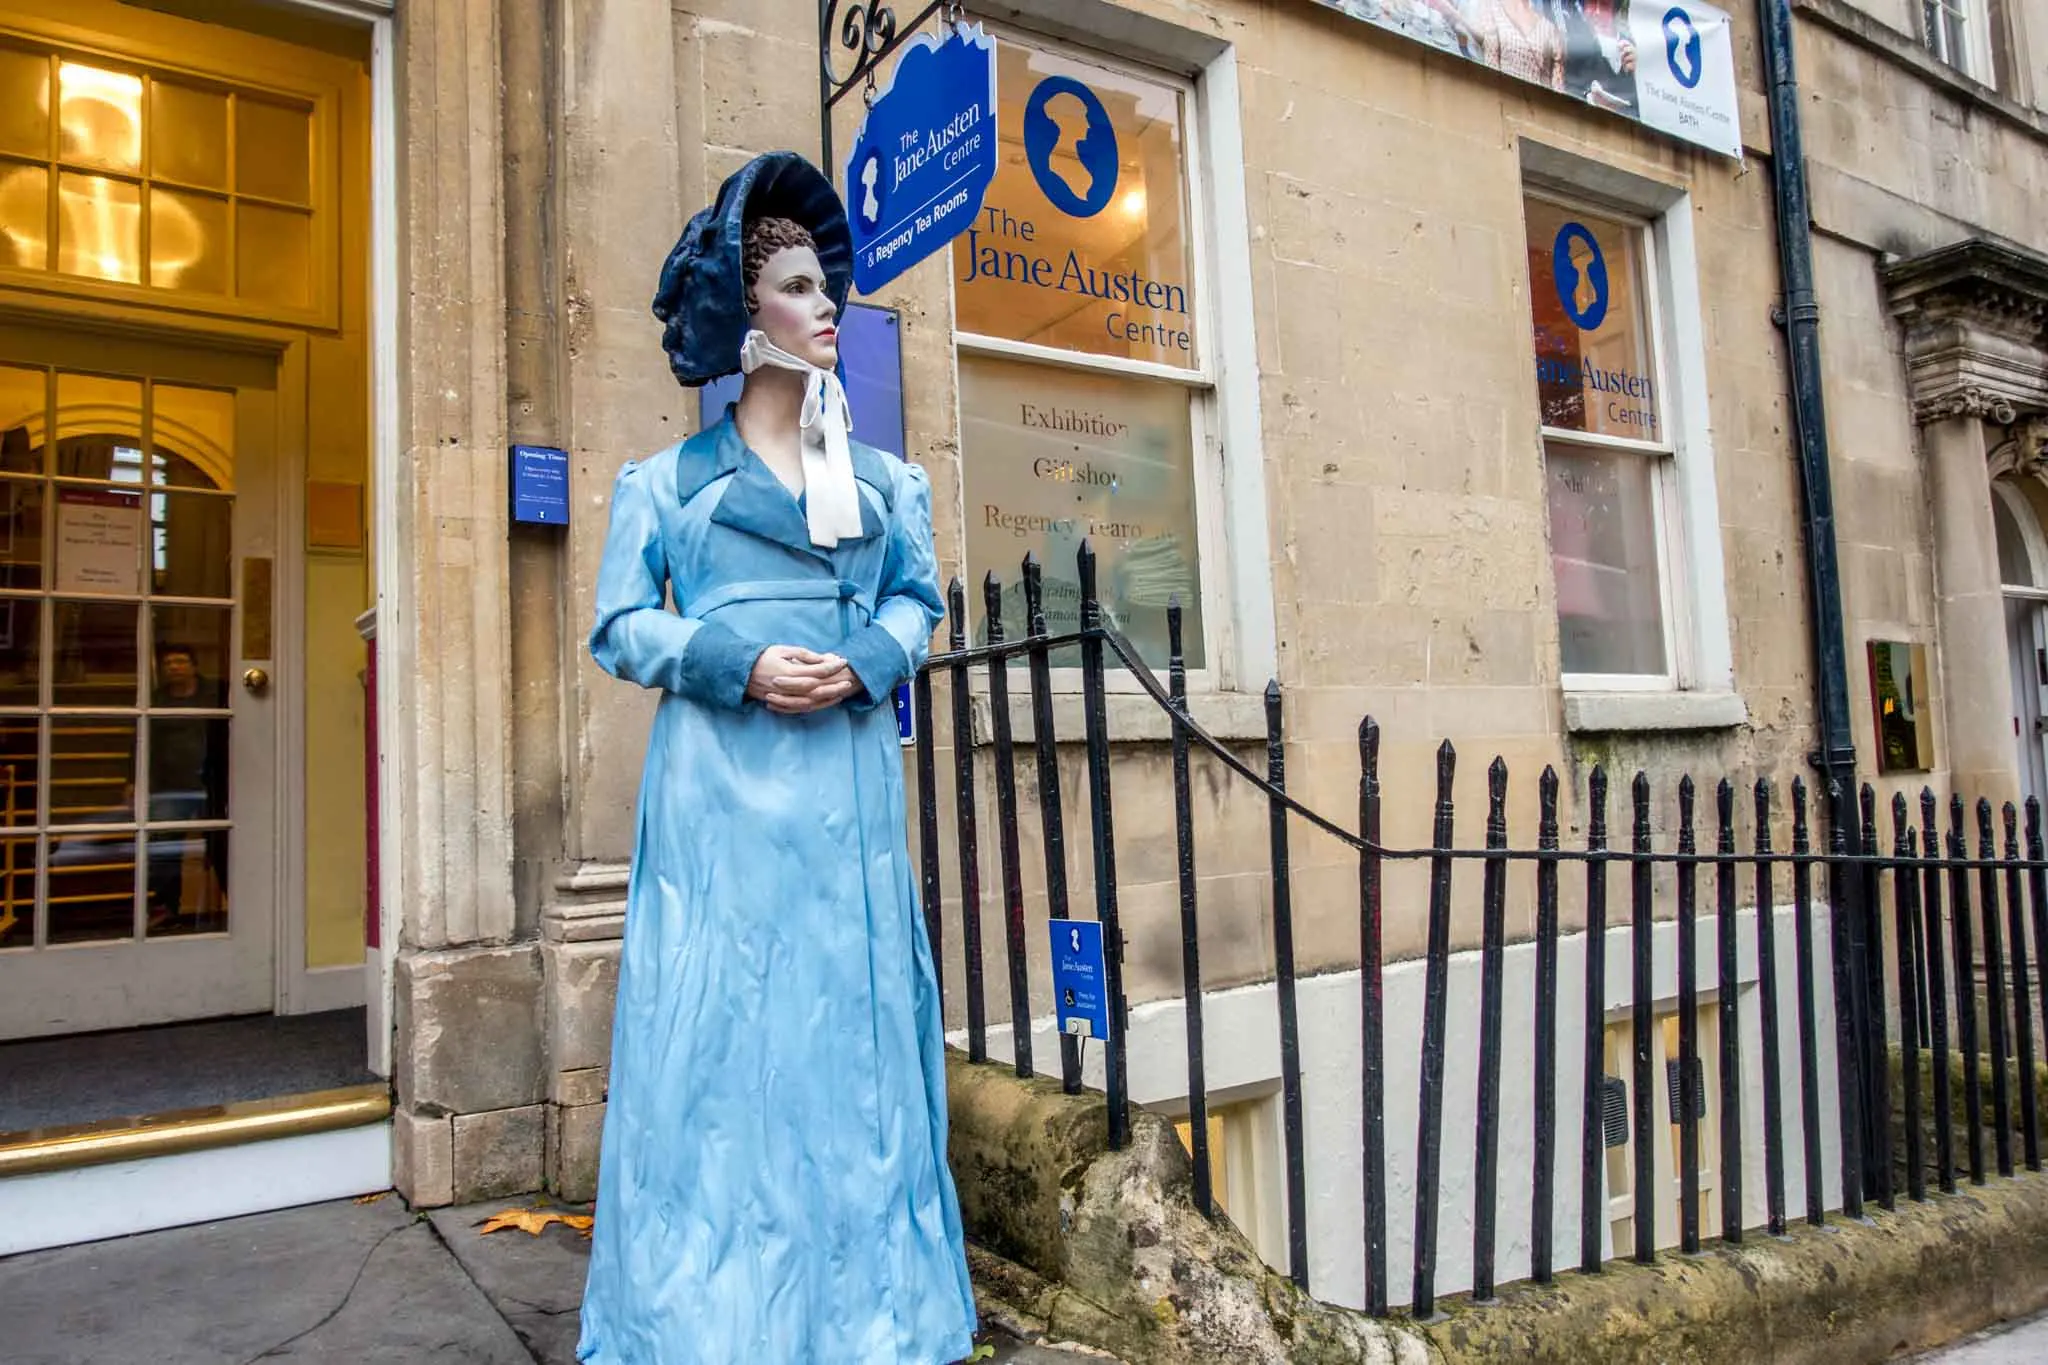 Statue of a woman in a blue dress in front of the Jane Austen Center.